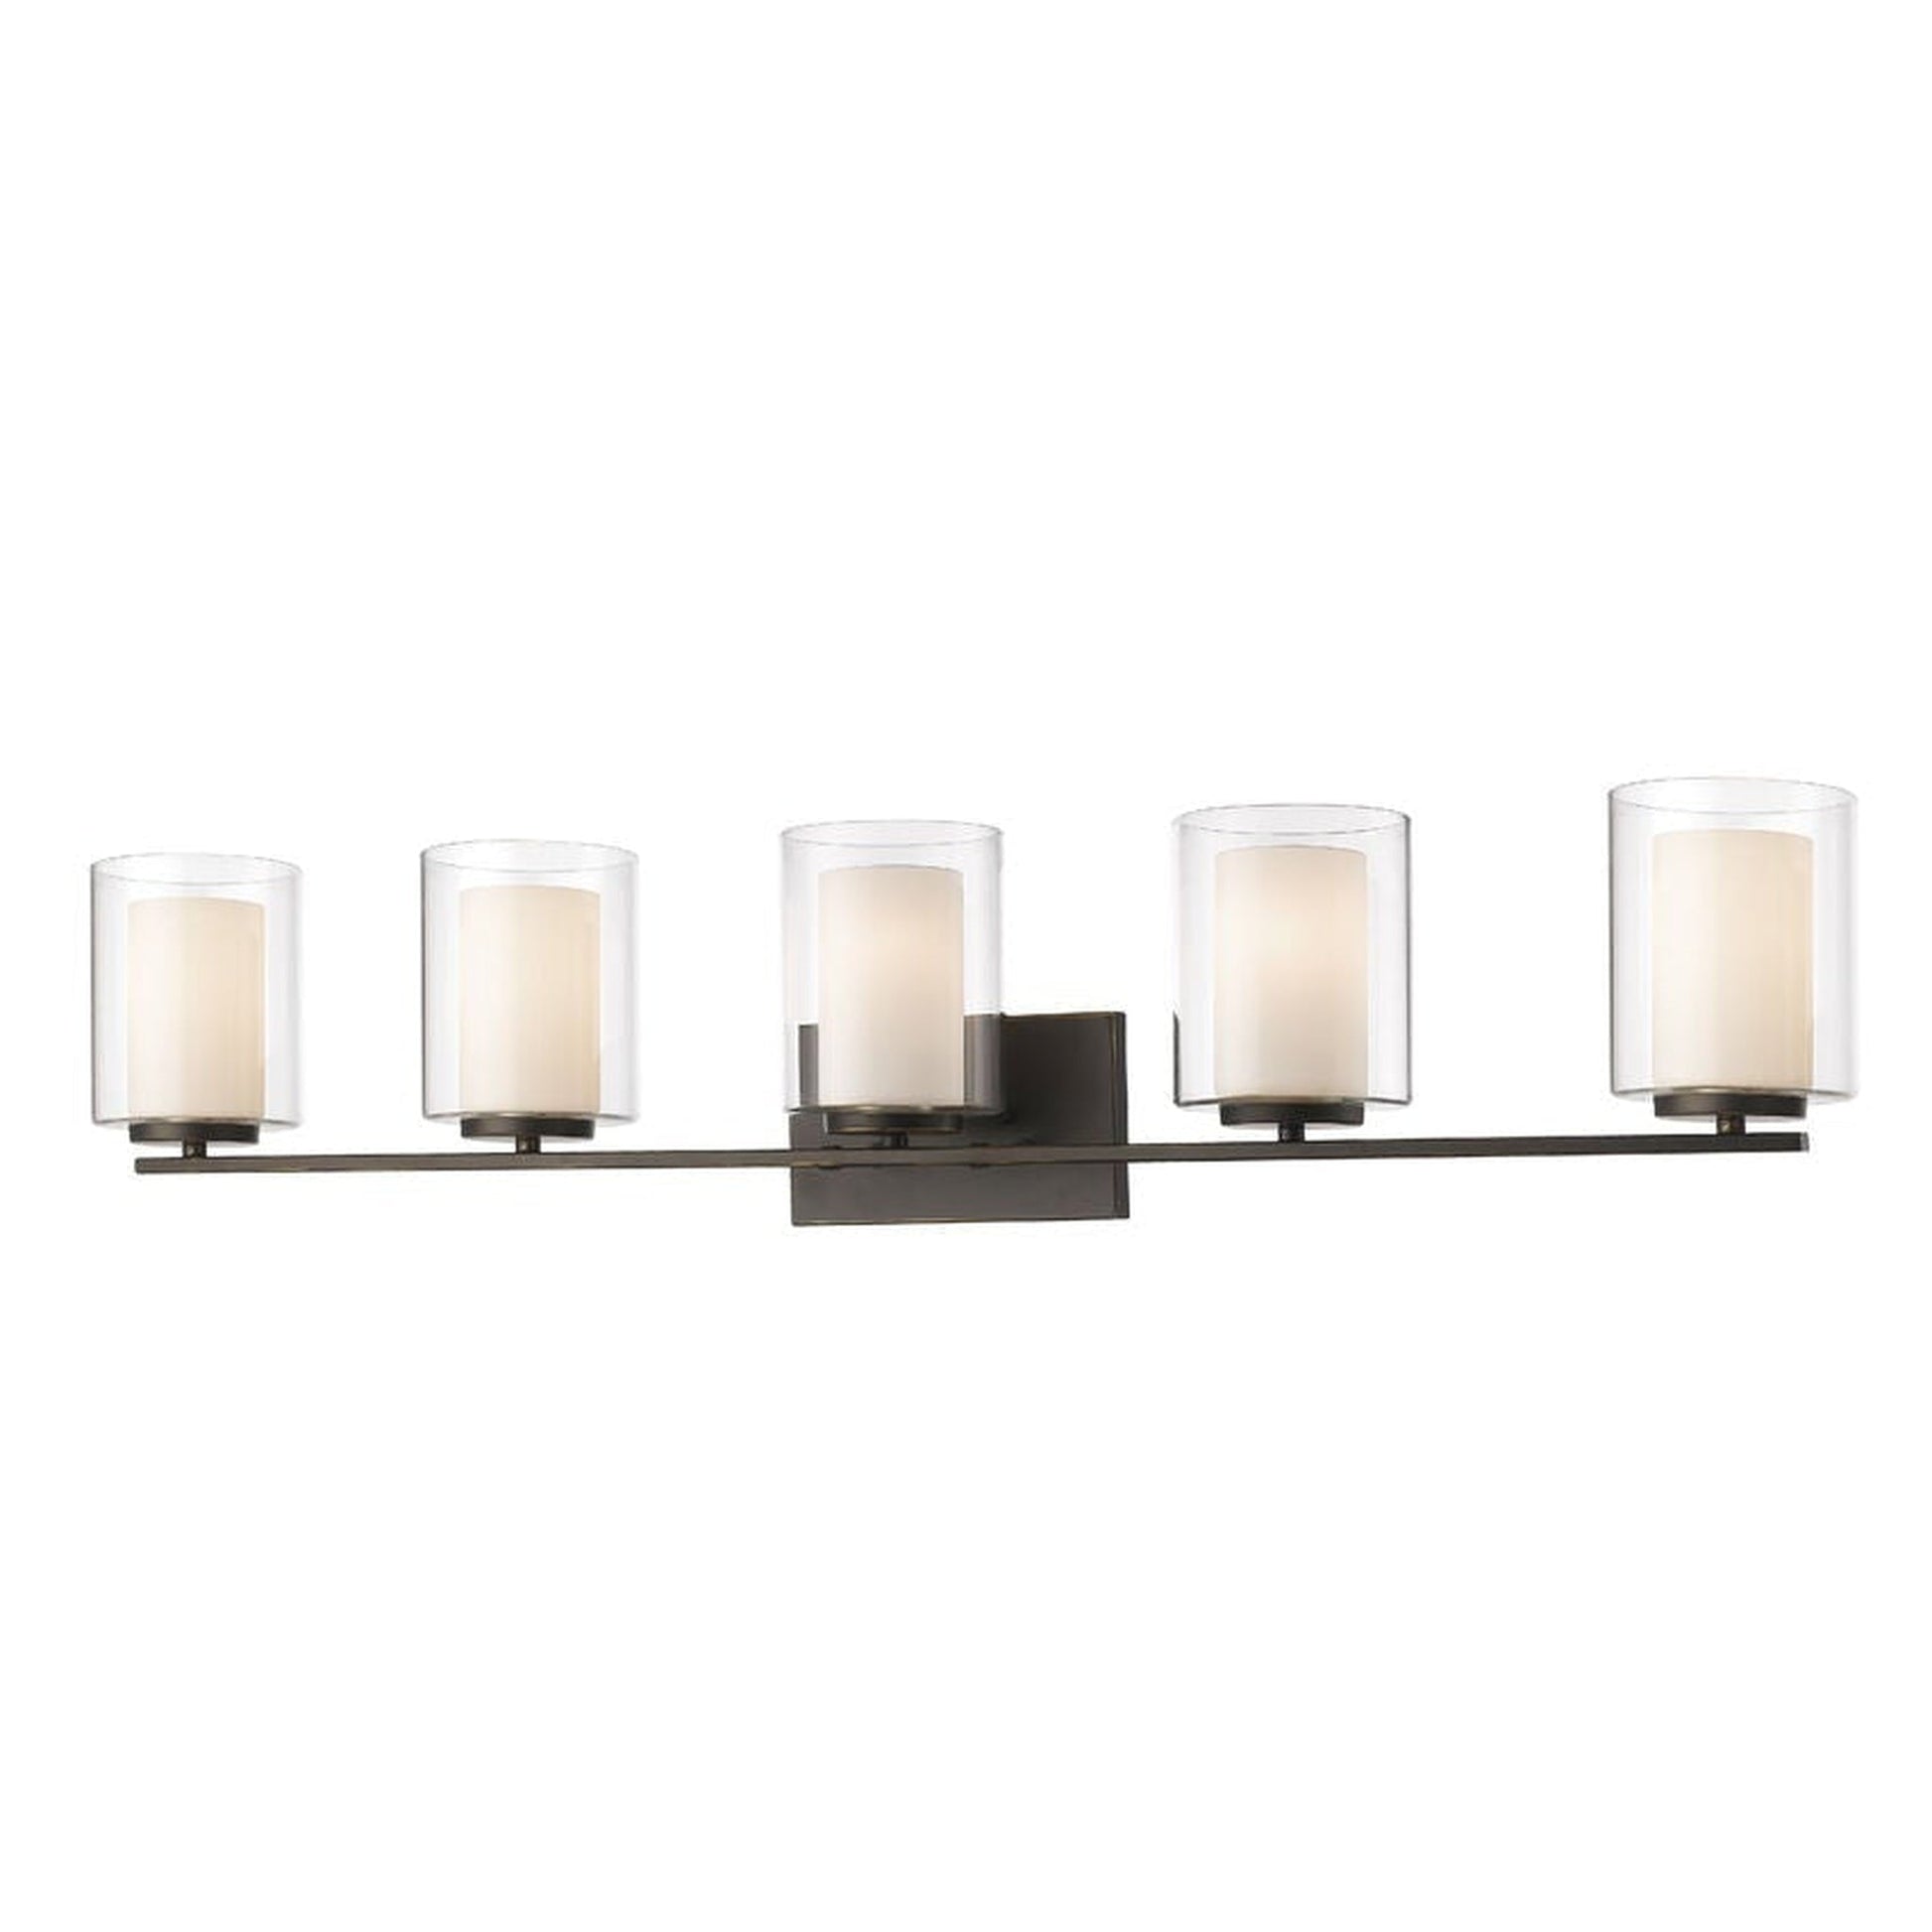 Z-Lite Willow 41" 5-Light Olde Bronze Vanity Light With Clear and Matte Opal Glass Shade